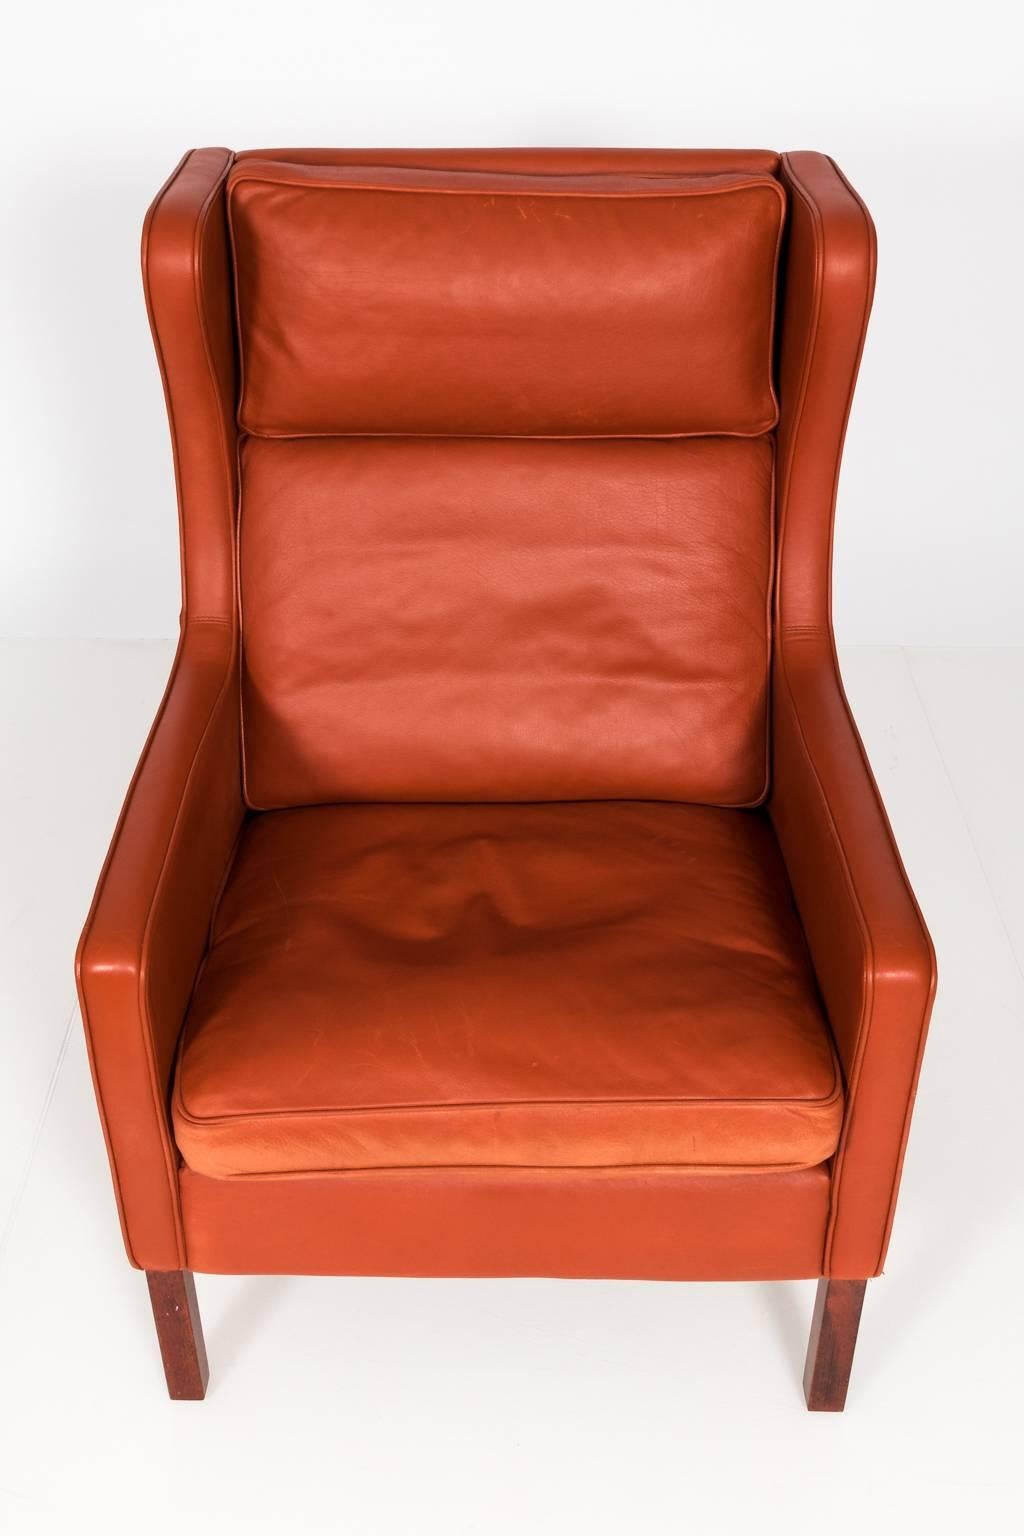 Stouby Leather Wing Chair and Ottoman, Denmark, circa 1970s 3